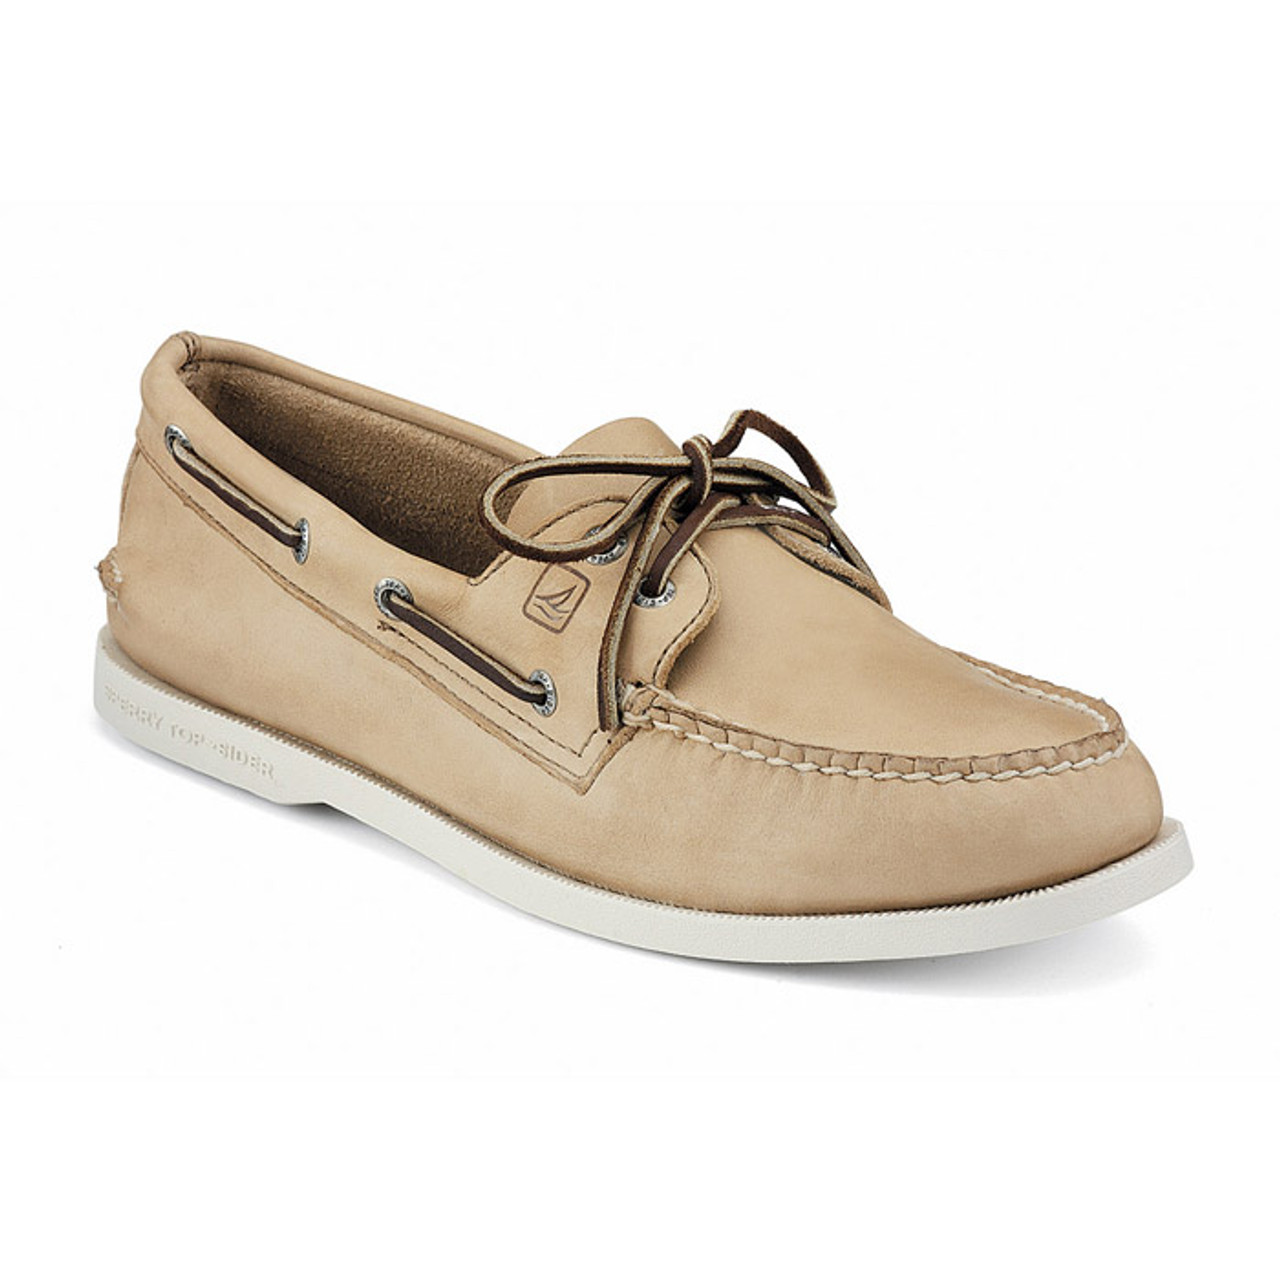 Sperry A/O Oatmeal Mens Boat Shoes - | Discount Sperry Men's Shoes & - Shoolu.com | Shoolu.com